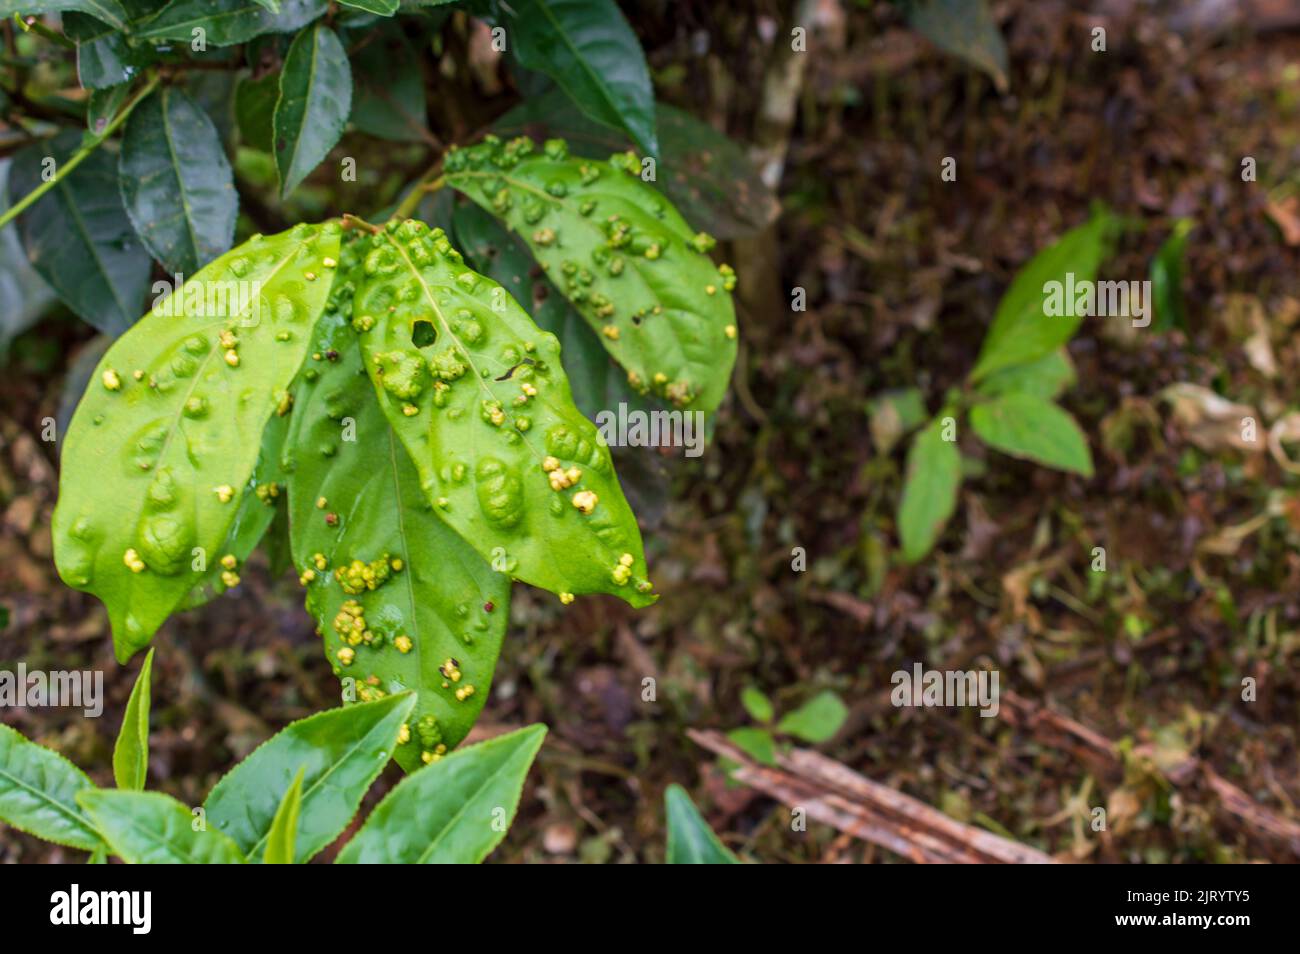 Infectious plant diseases are caused by living agents or pathogens. Here are some infected green leaves in focus. Stock Photo